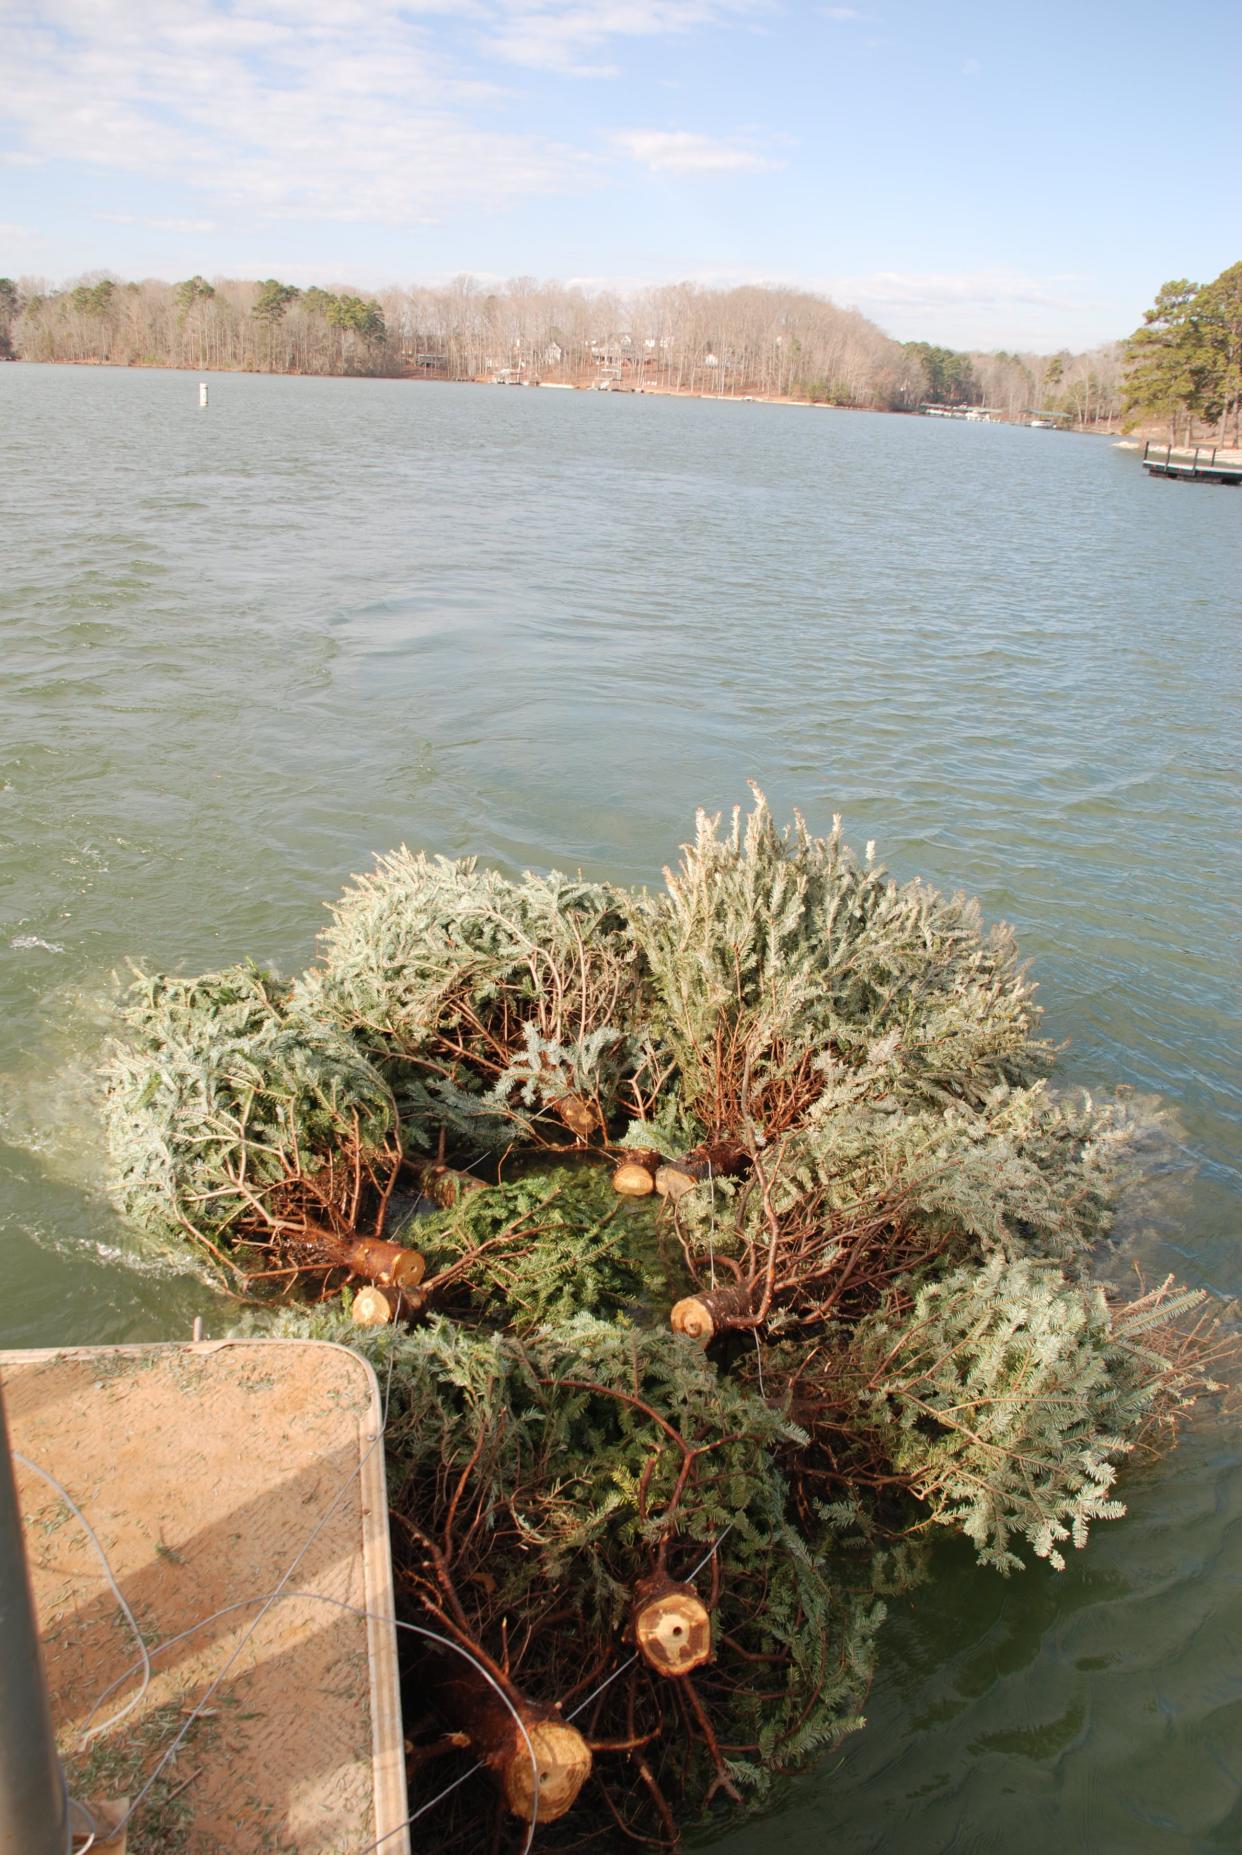 Live Christmas trees are recycled at Hartwell Dam and Lake Project and J. Strom Thurmond Lake to help create habitats for freshwater fish. Courtesy of U.S. Army Corps of Engineers, Savannah District.